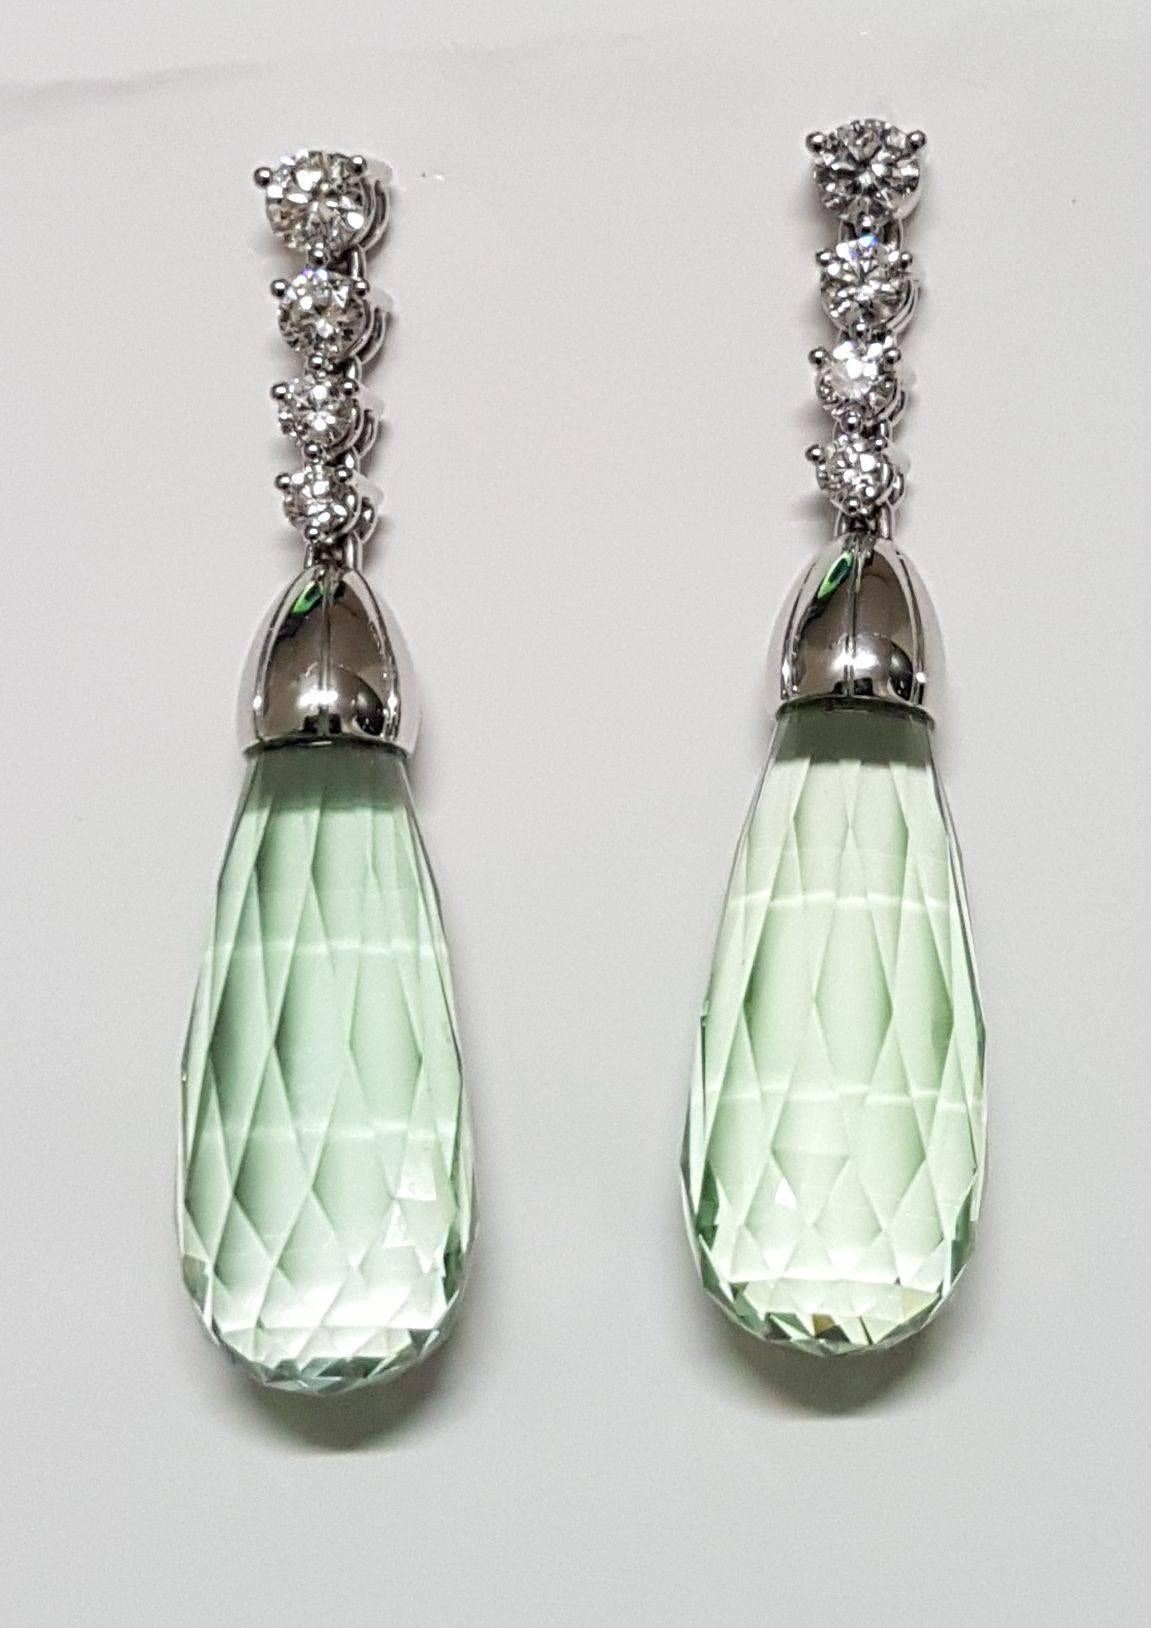 Marvelous earrings, 750/0 white gold, diamonds and prasiolite briolettes.
Prasiolite briolettes together 18.14 carats, diamonds with a total weight of 0.51 carats, H/si. Total length of earrings 3,5 cm / 1.38 inches
Fitting necklace available to